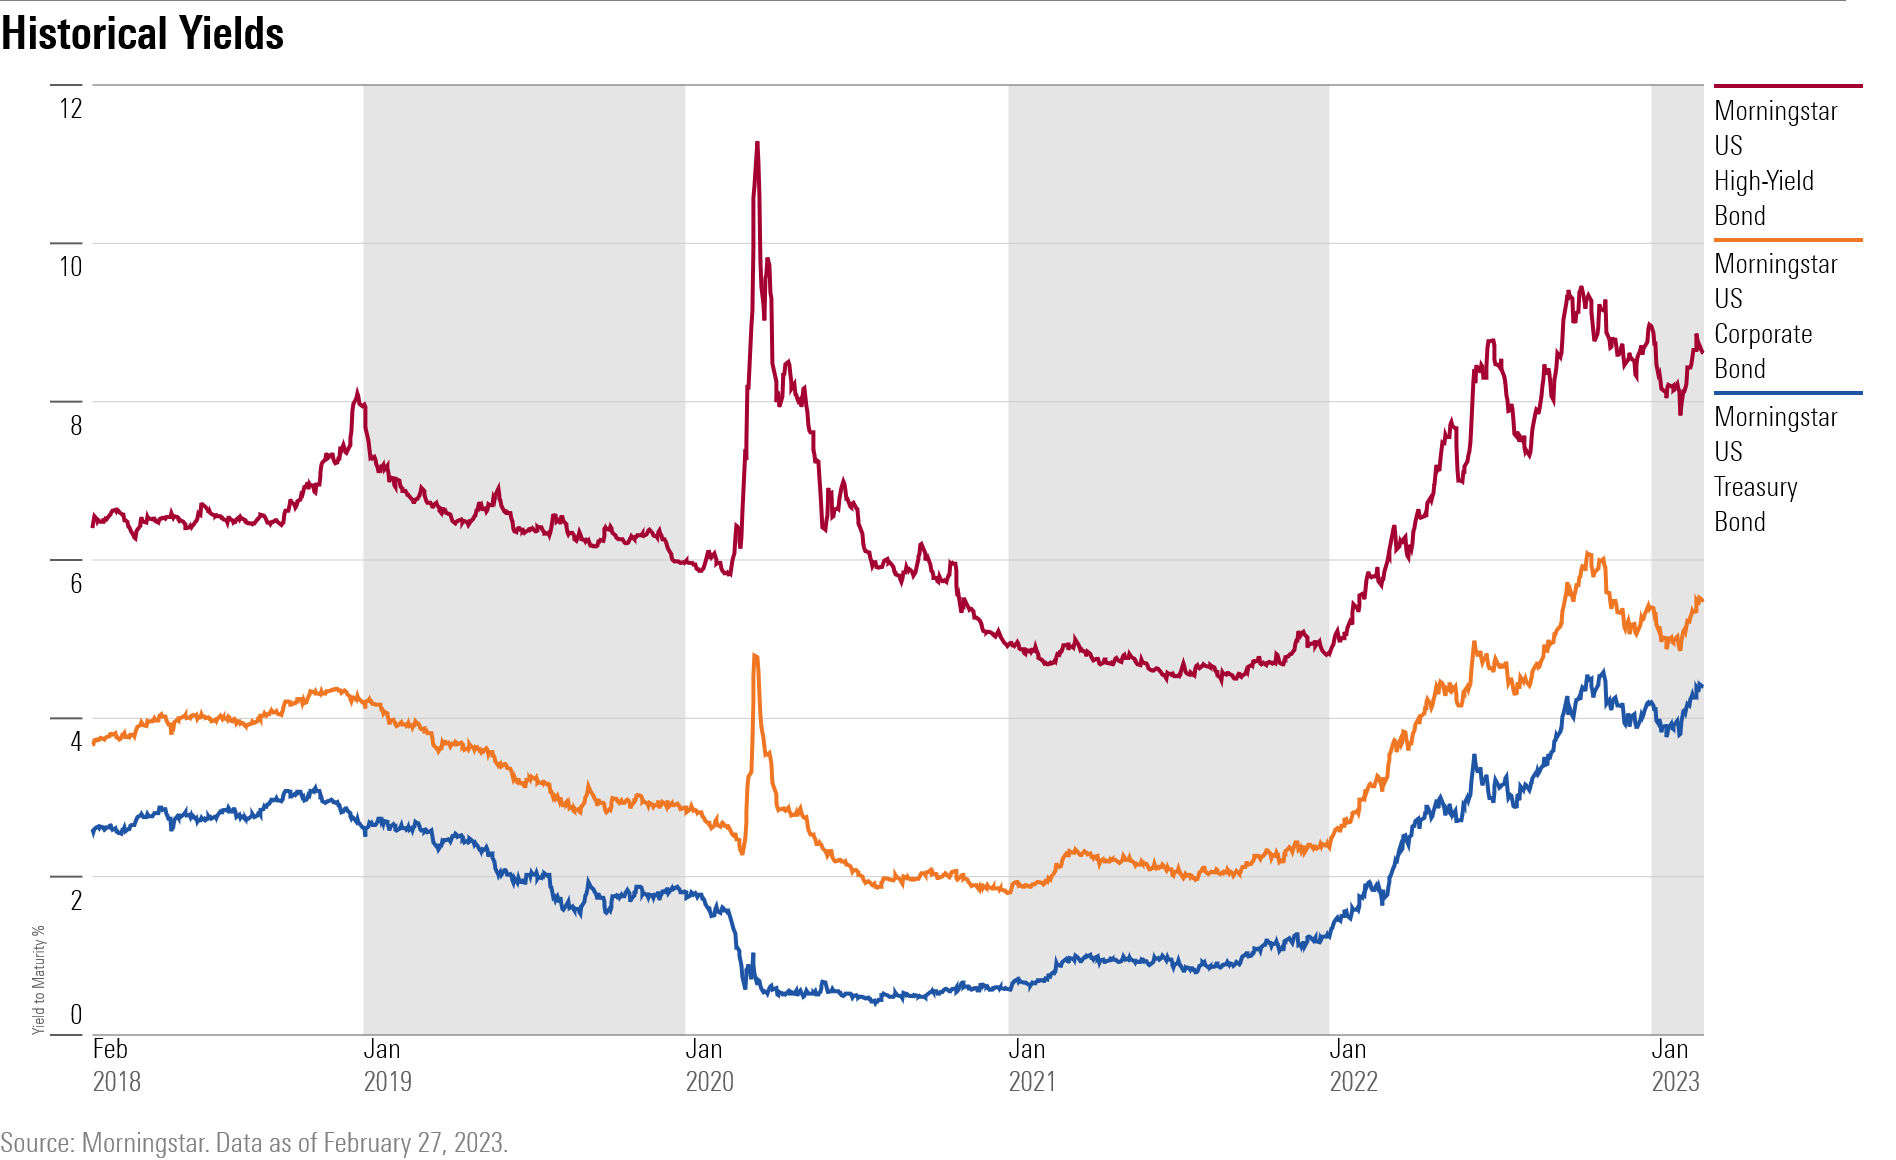 A line chart of the historical yields over the past five years of Morningstar indexes representing U.S. high-yield bonds, corporate bonds, and Treasuries.